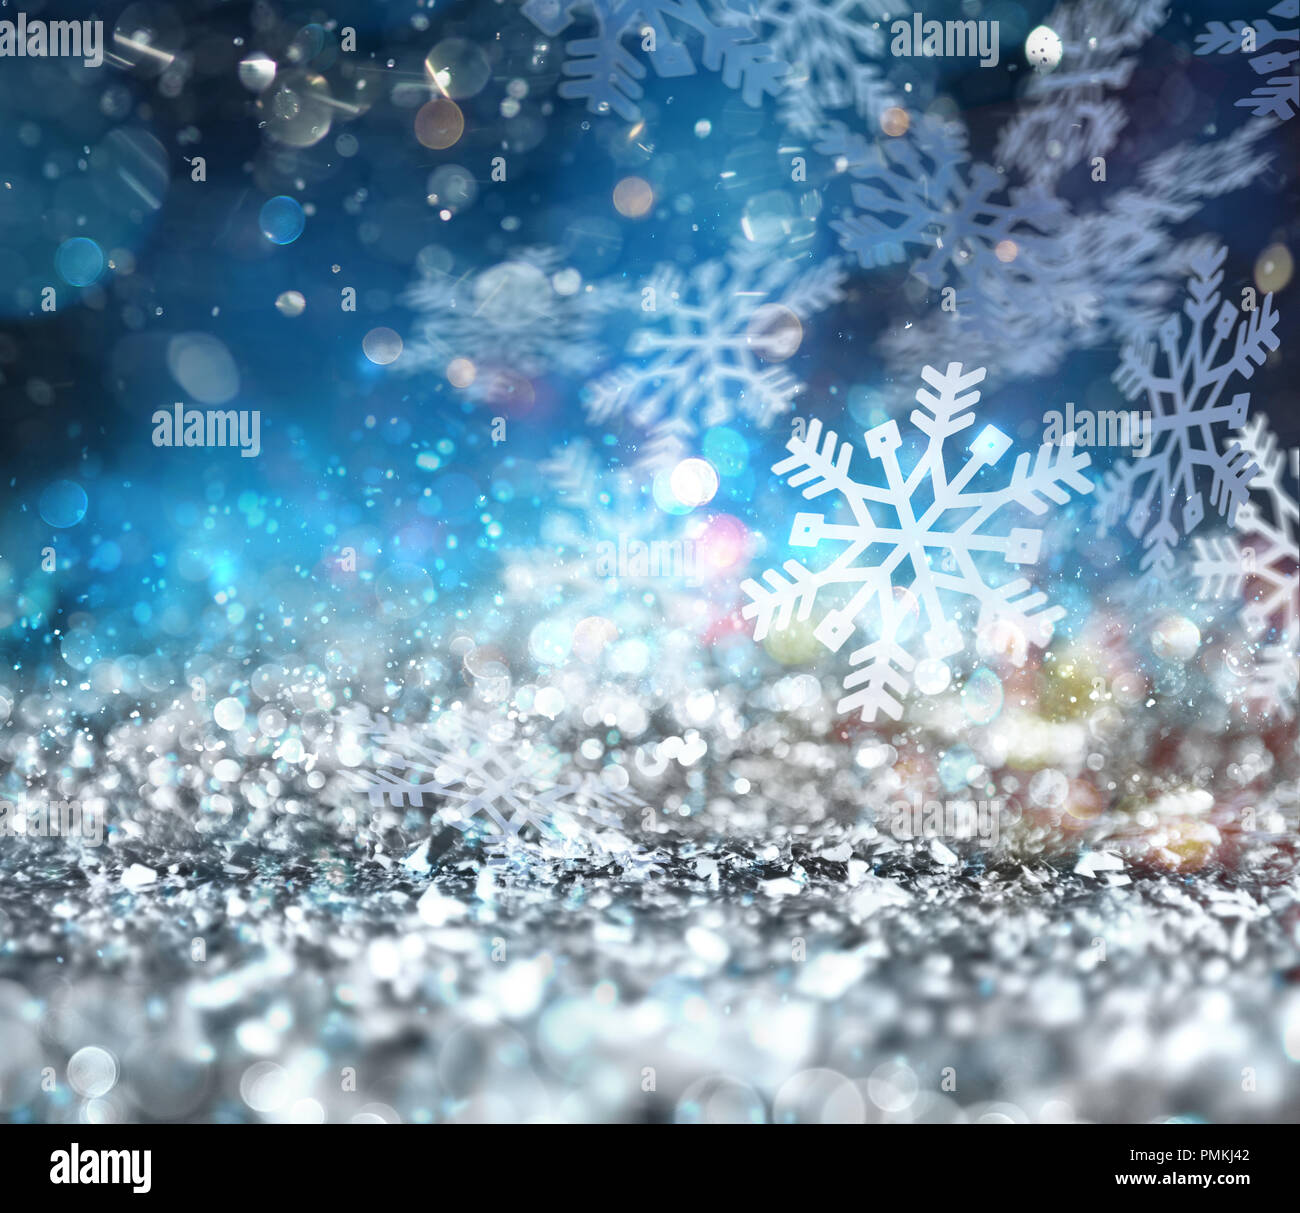 Glitter Snowflake In Snow Stock Photo, Picture and Royalty Free Image.  Image 11026853.